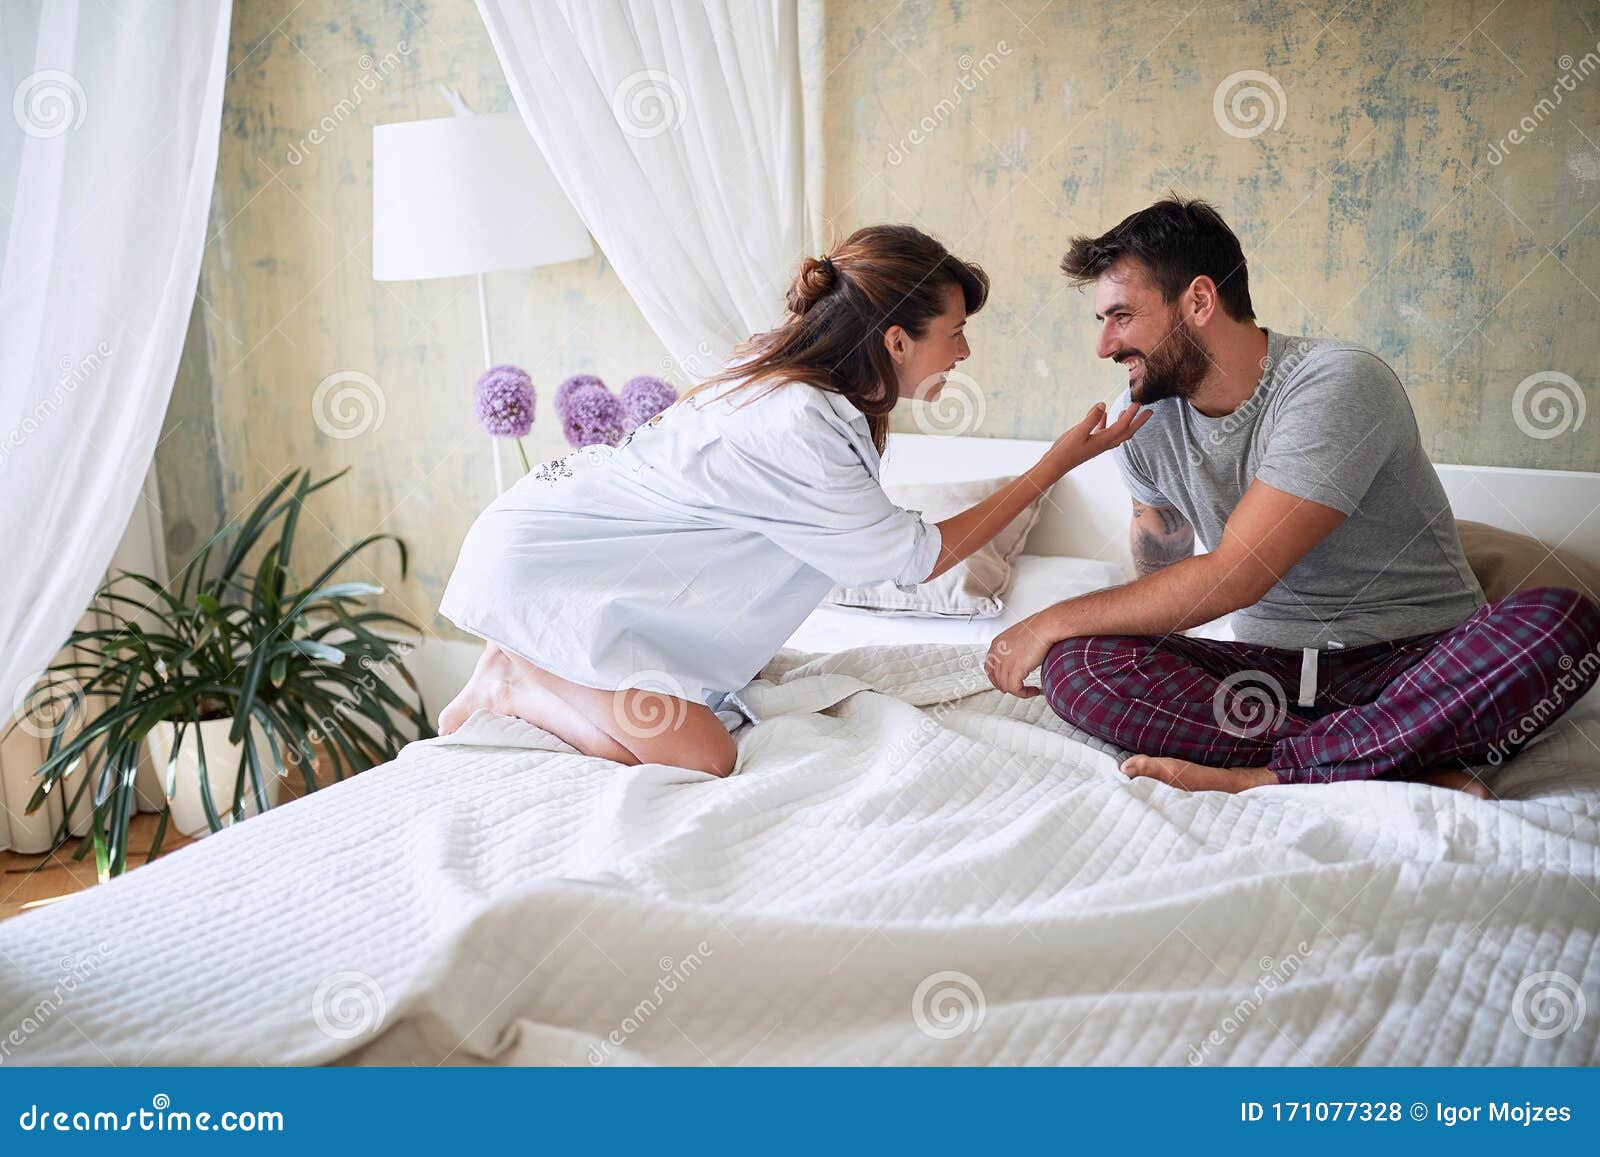 young sexy couple in underwear having a foreplay in bed in the morinig on valentines day. intimacy, passion, erotic concept